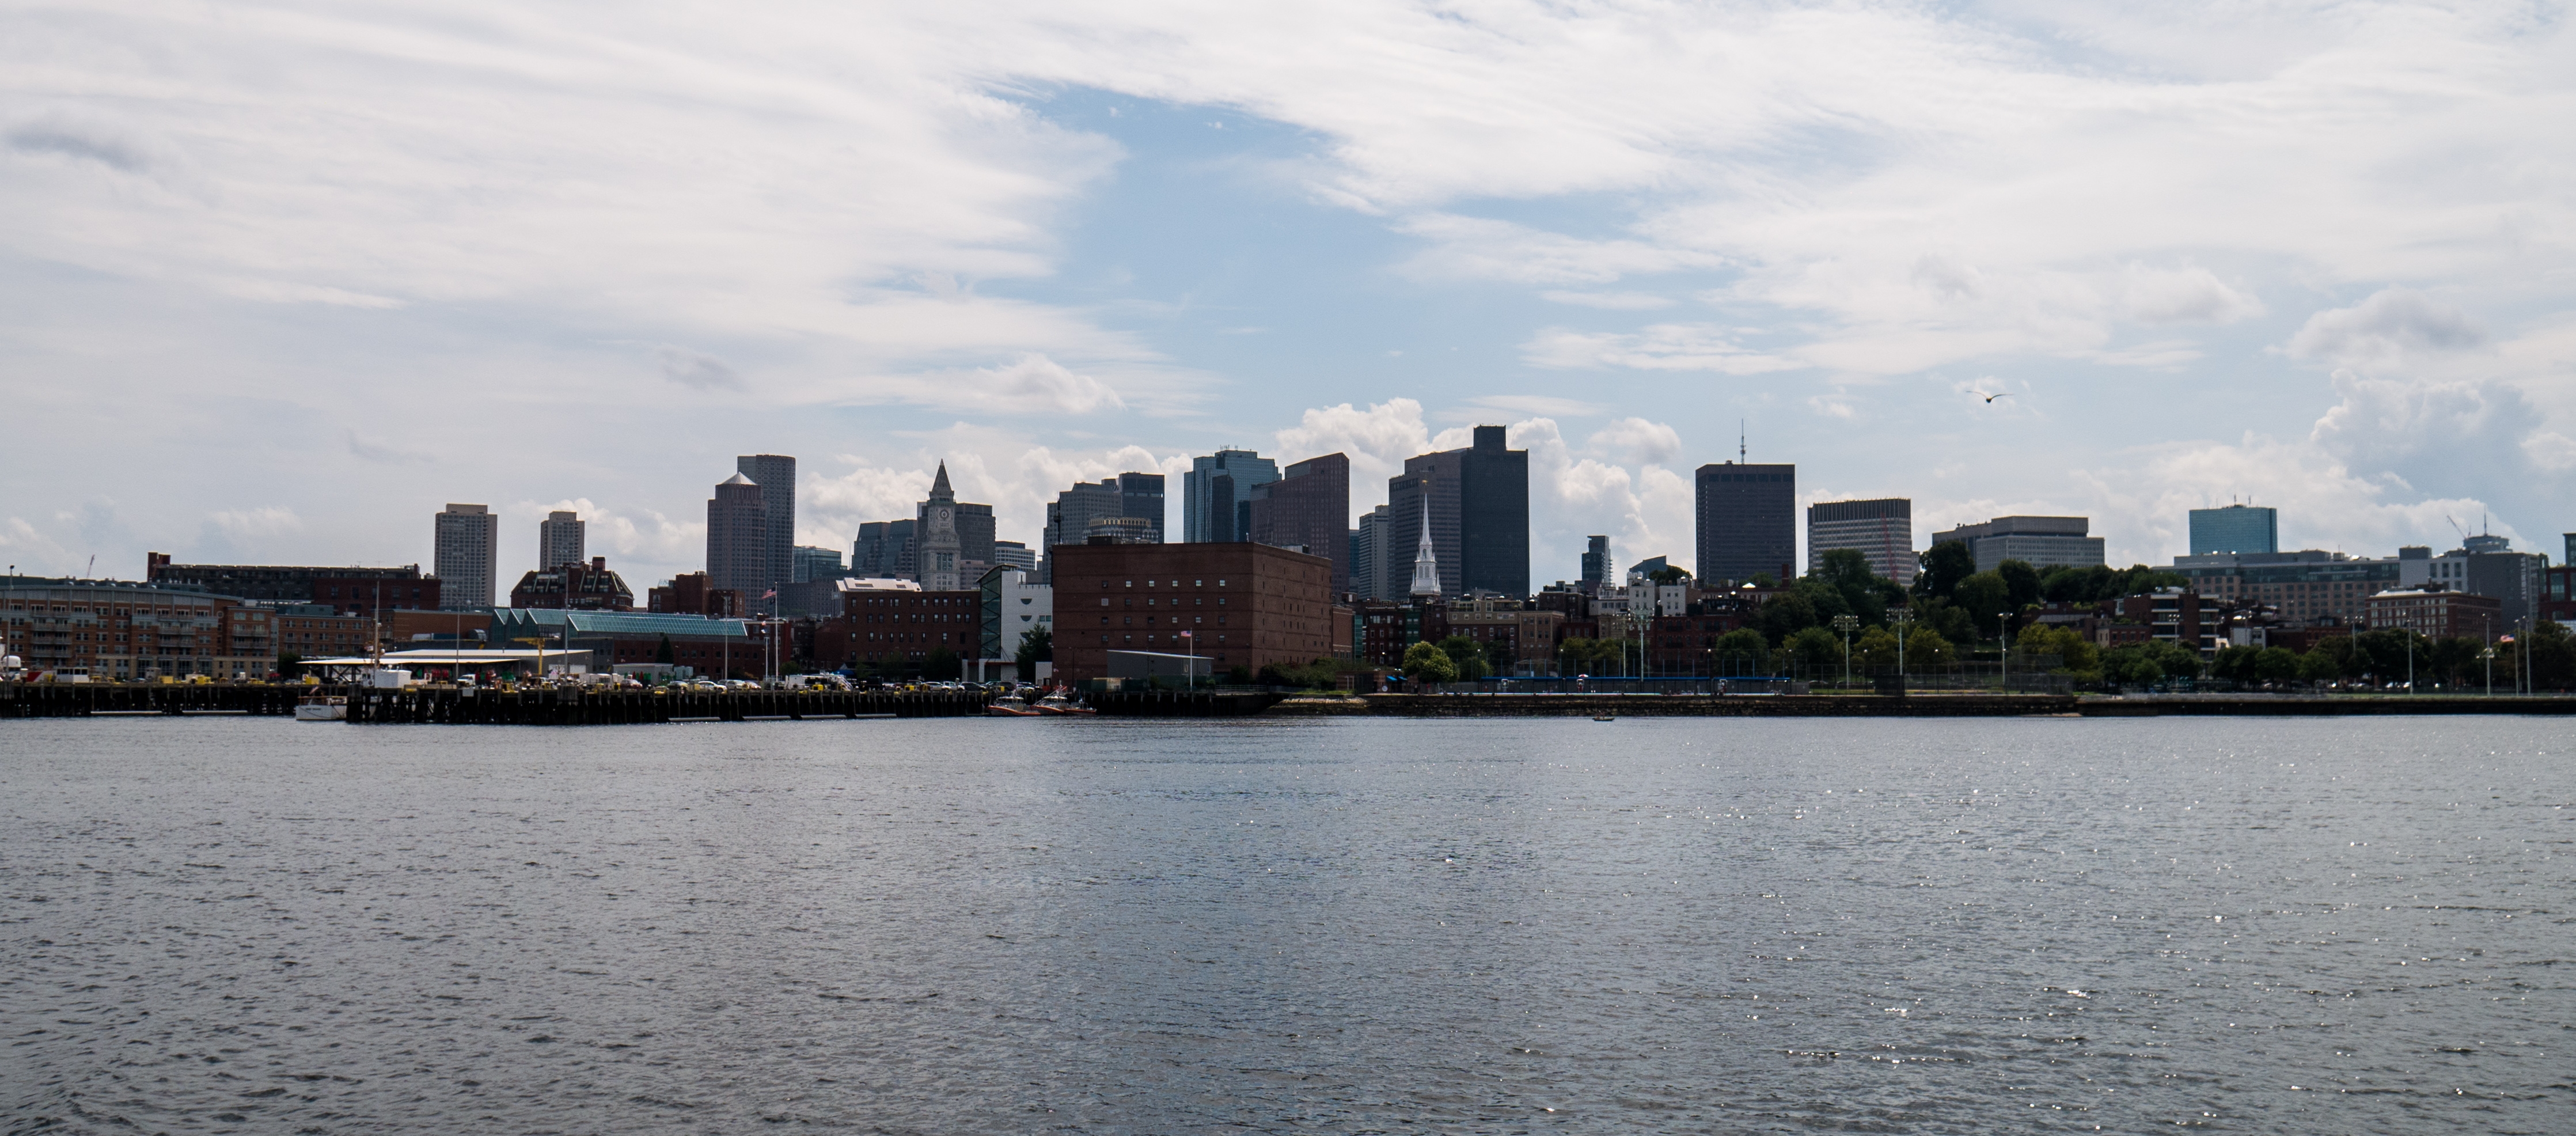 Boston Skyline from the Harbor Ferry